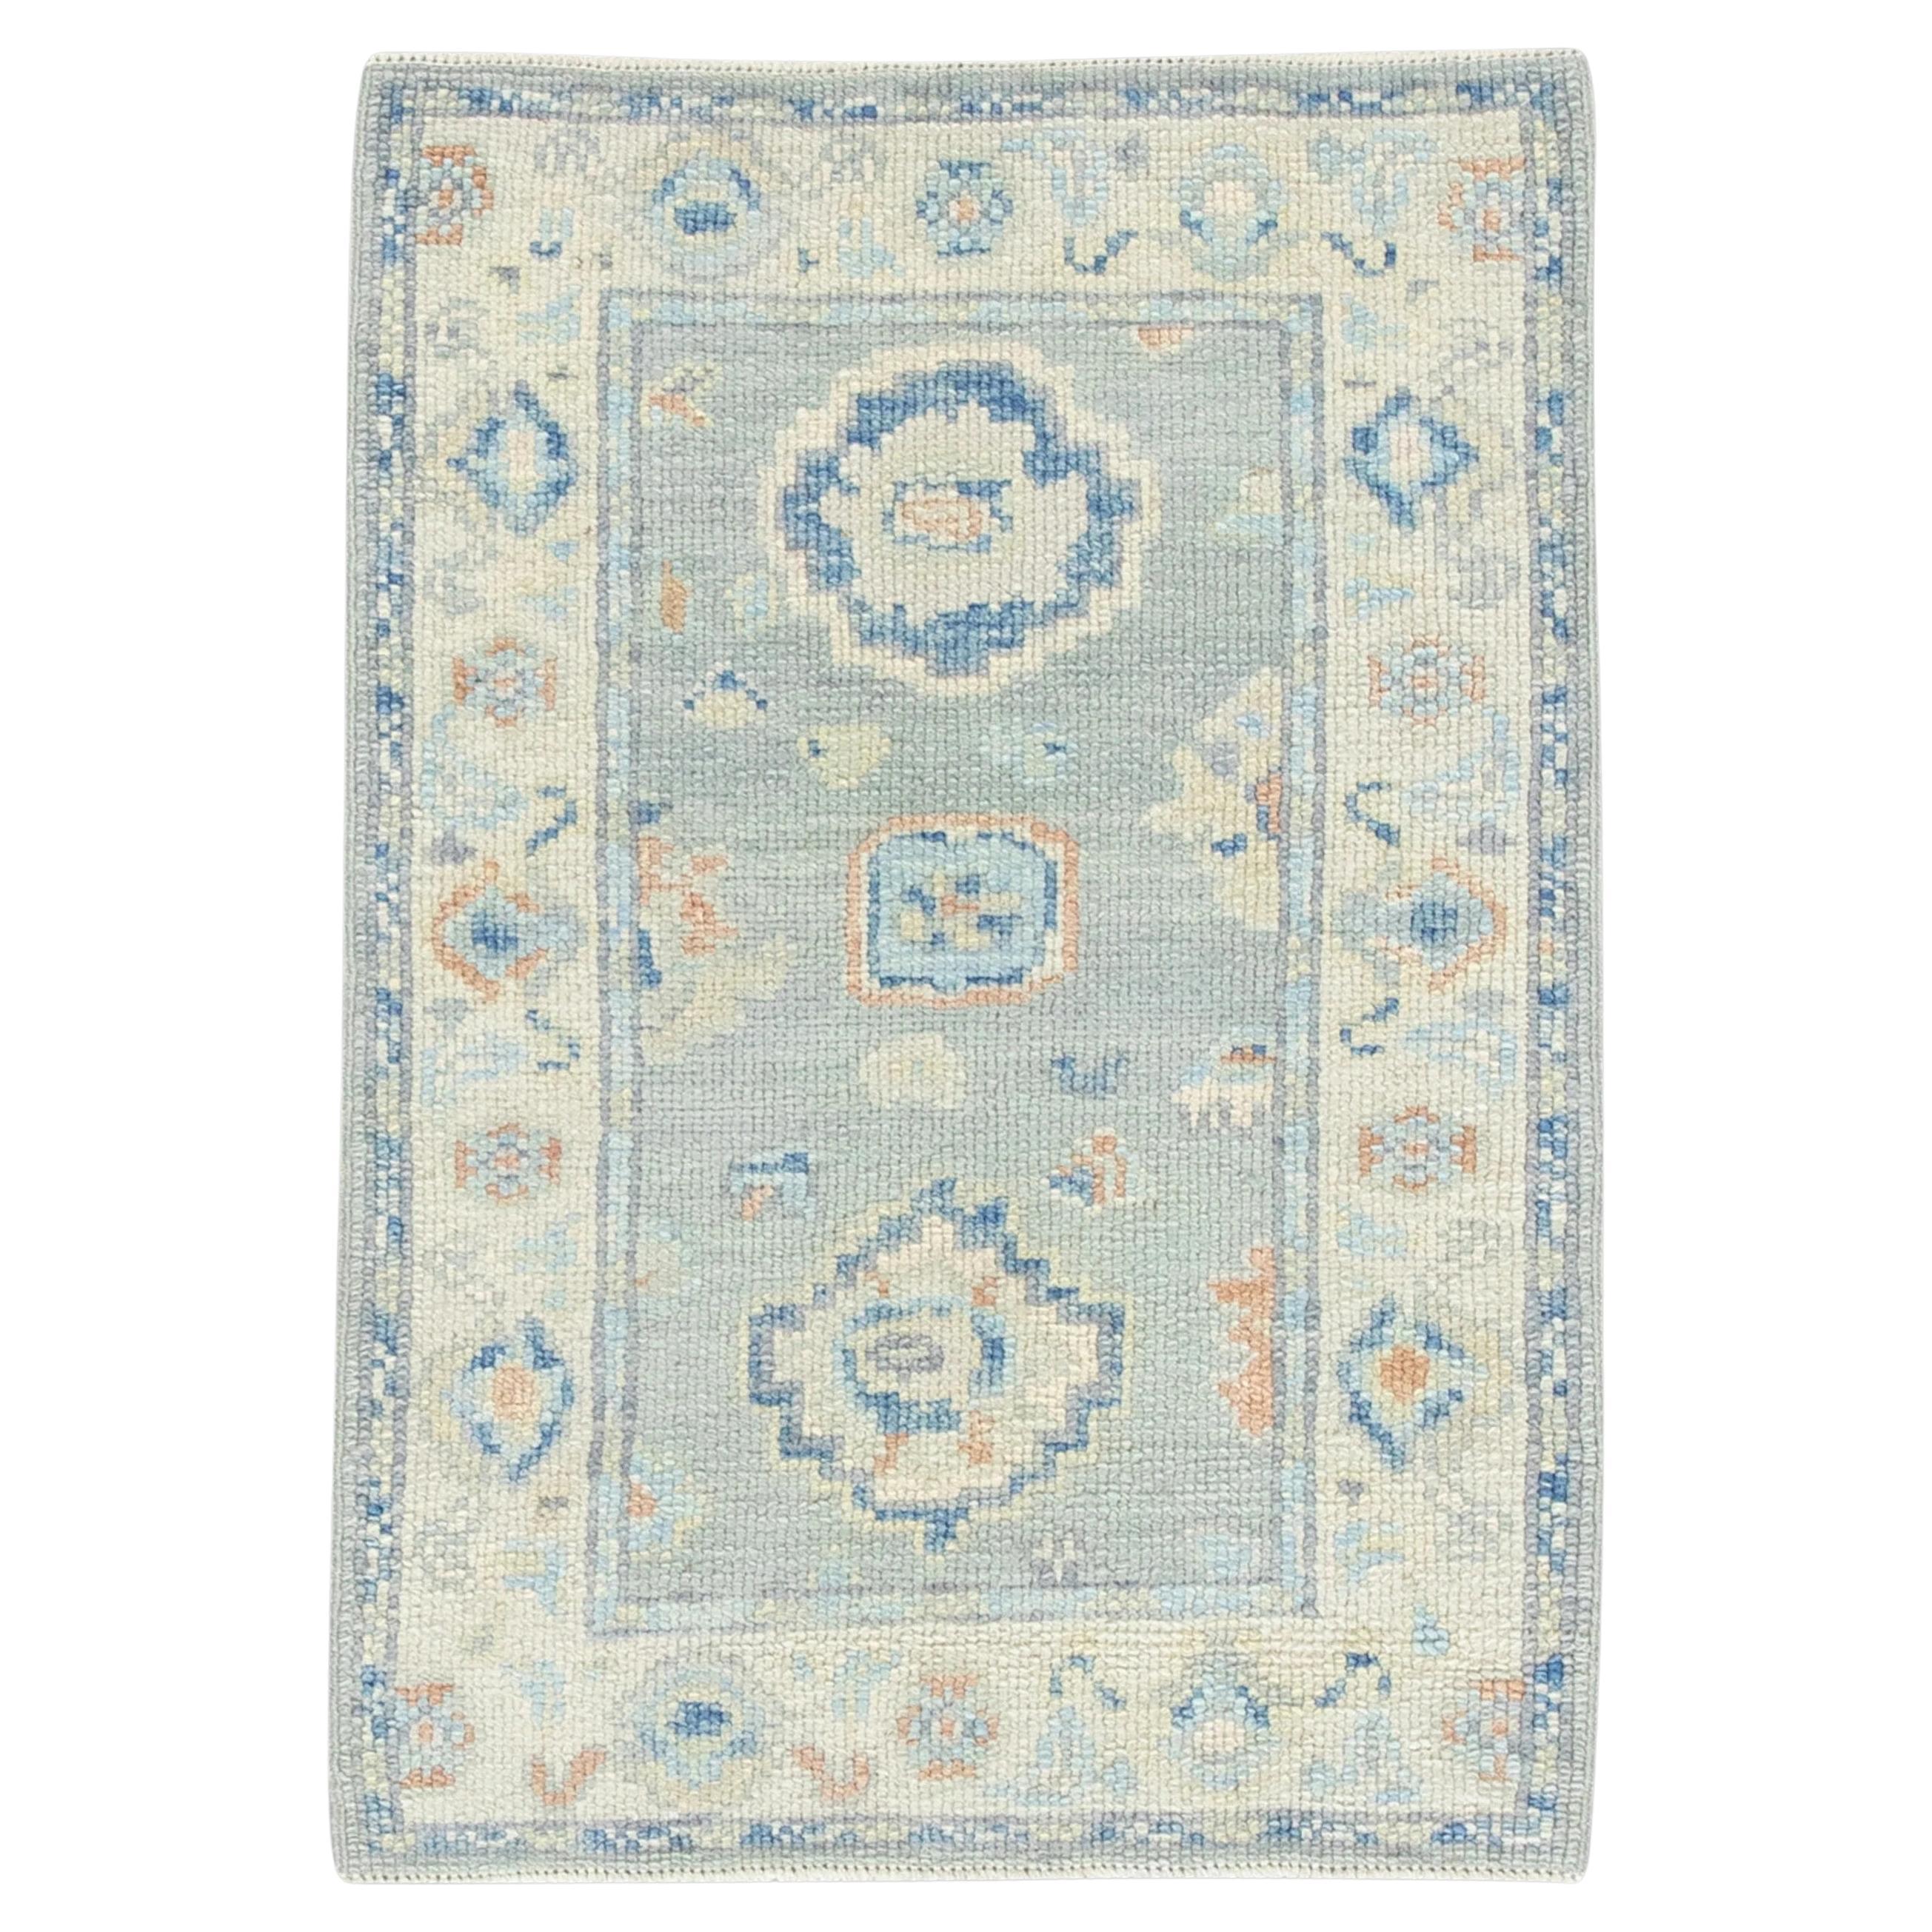 Blue Handwoven Wool Turkish Oushak Rug in Salmon Floral Design 2'1" x 3' For Sale